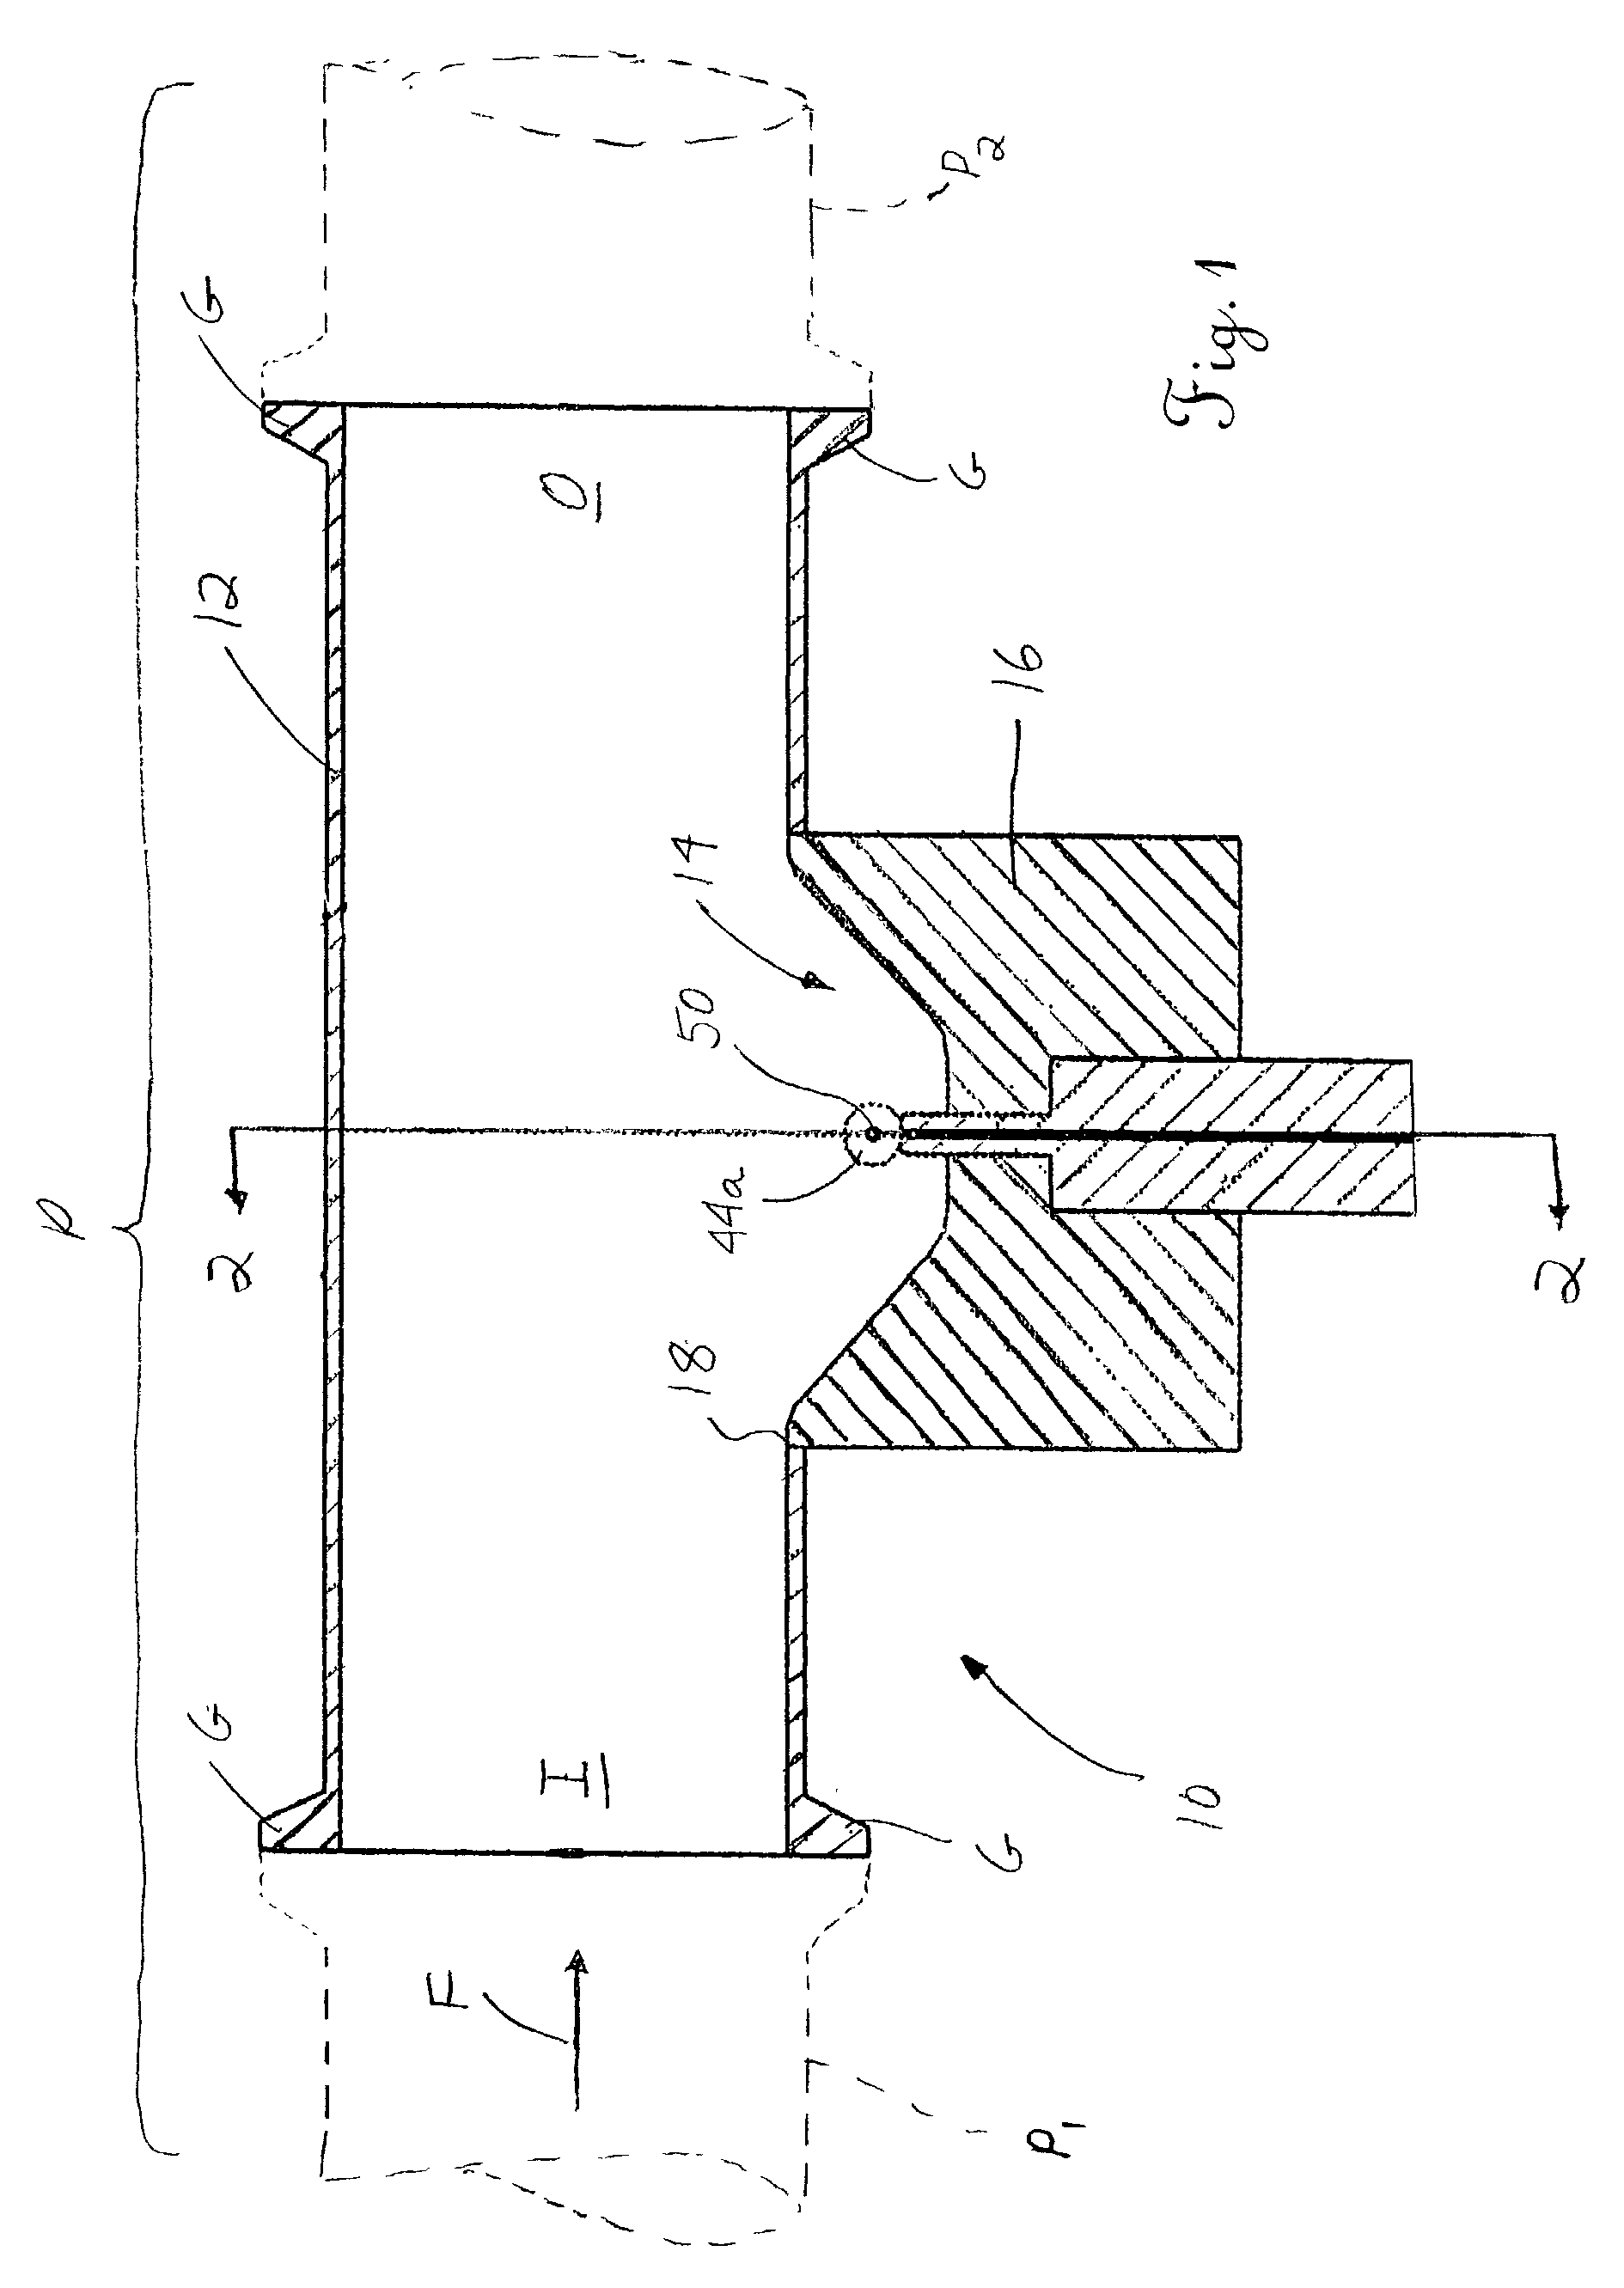 System and method for sensing a characteristic of a fluid and related apparatus